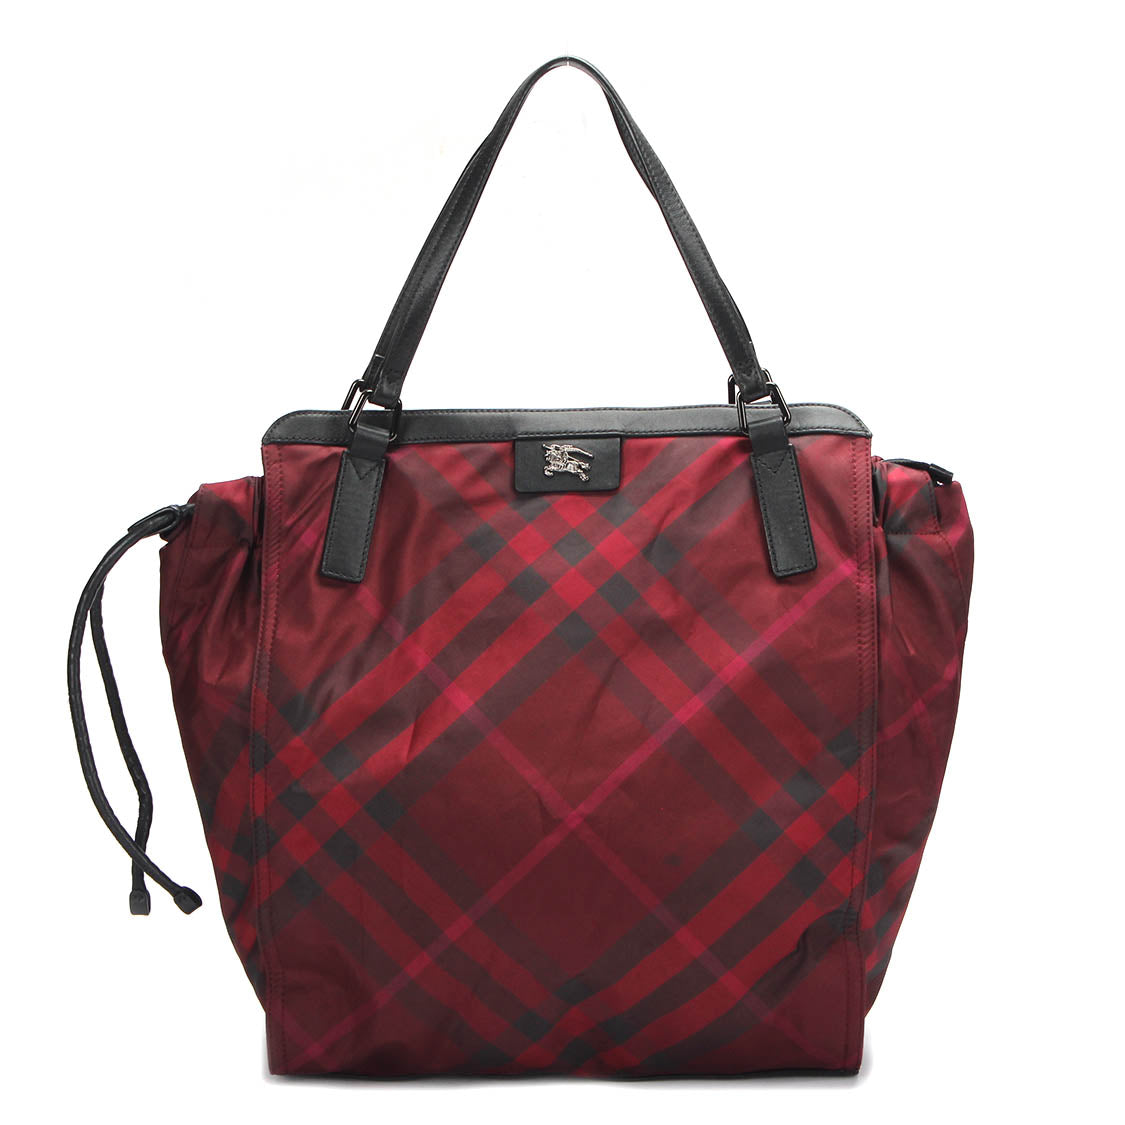 Burberry Plaid Buckleigh Nylon Tote Bag Canvas Tote Bag in Excellent condition